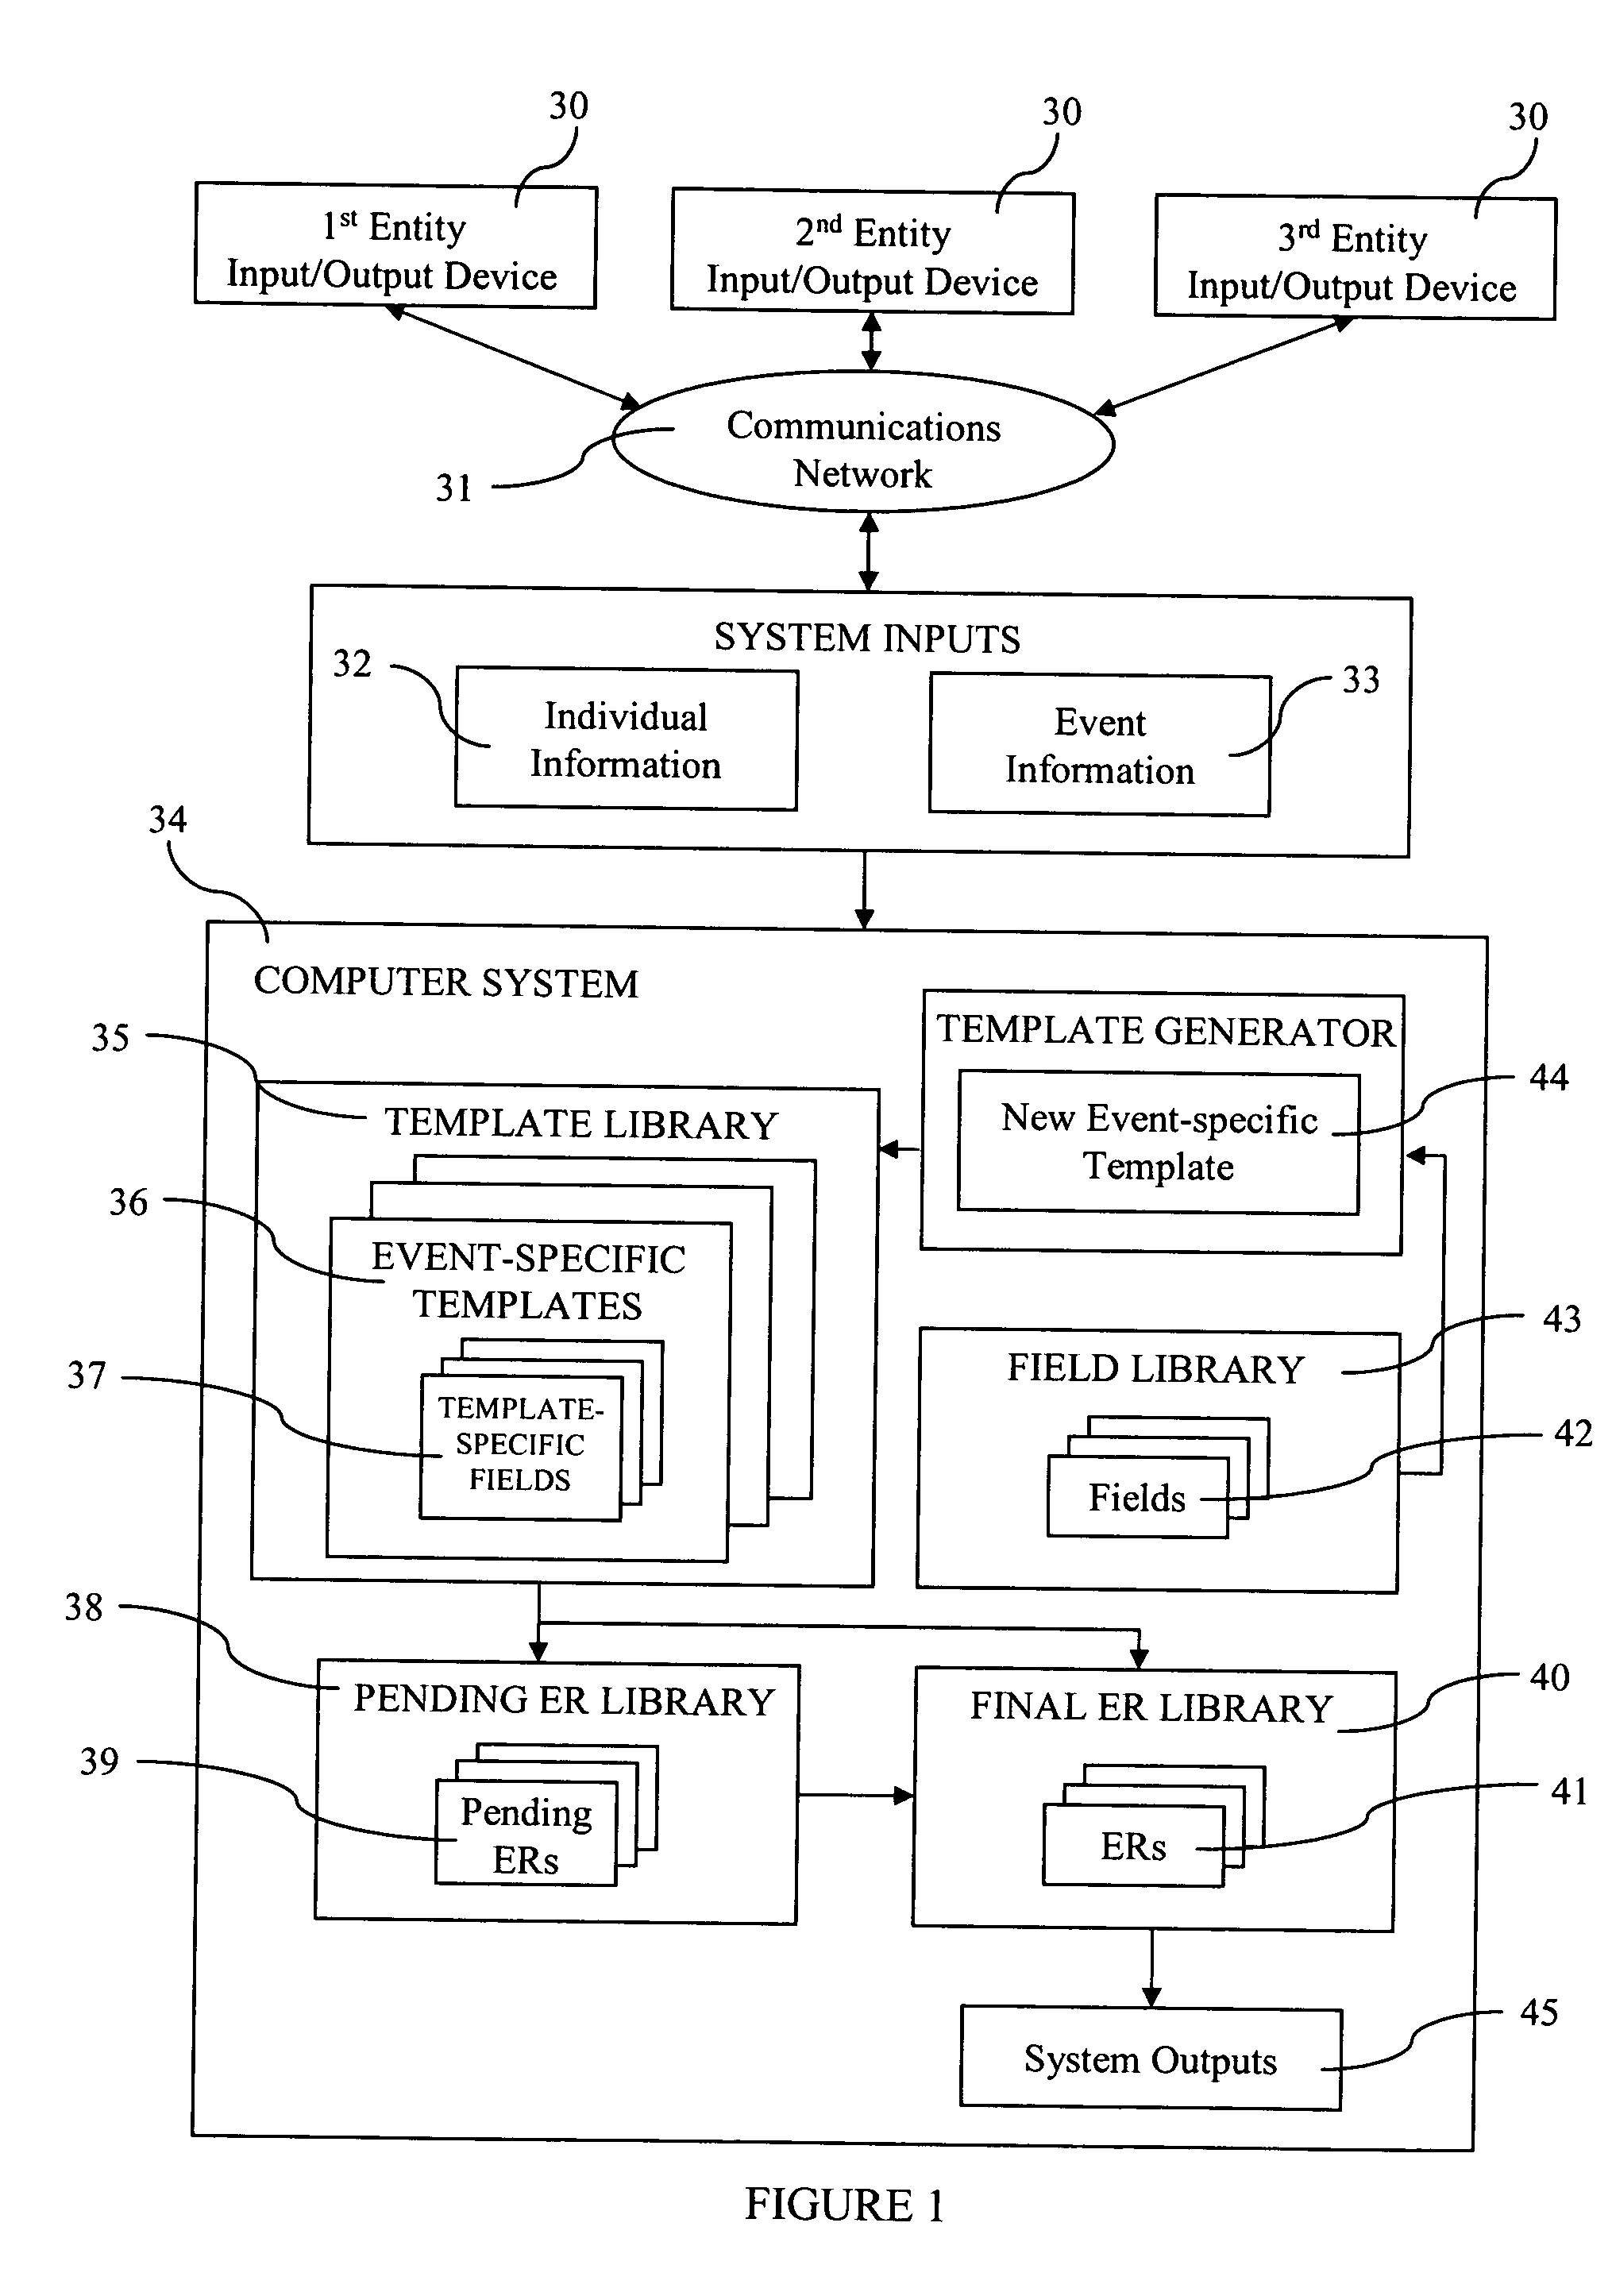 Systems and methods for documentation of encounters and communications regarding same